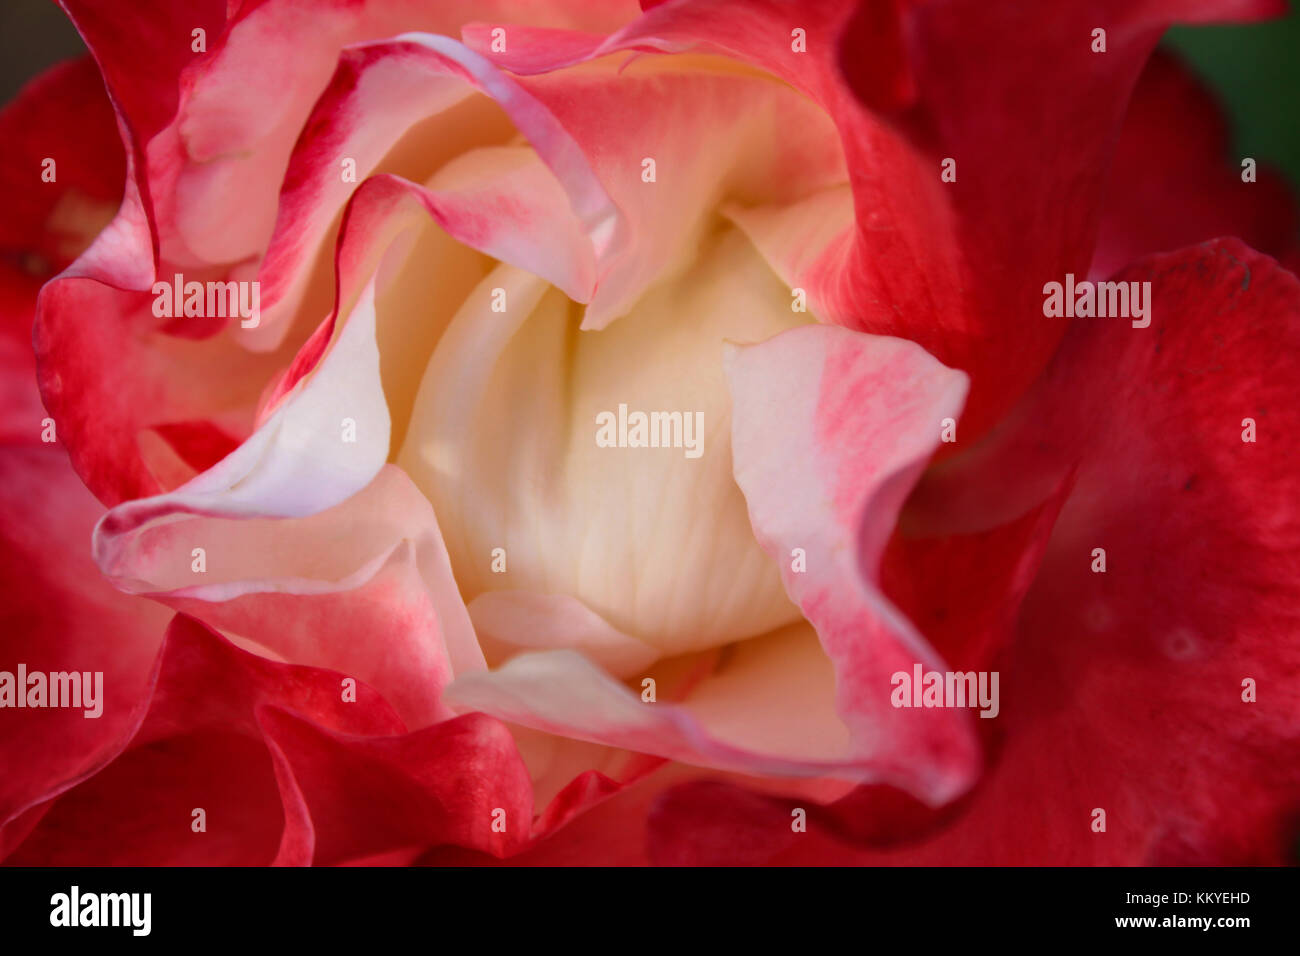 Closeup of center of rose that is intensely red on outside and white on inside Stock Photo